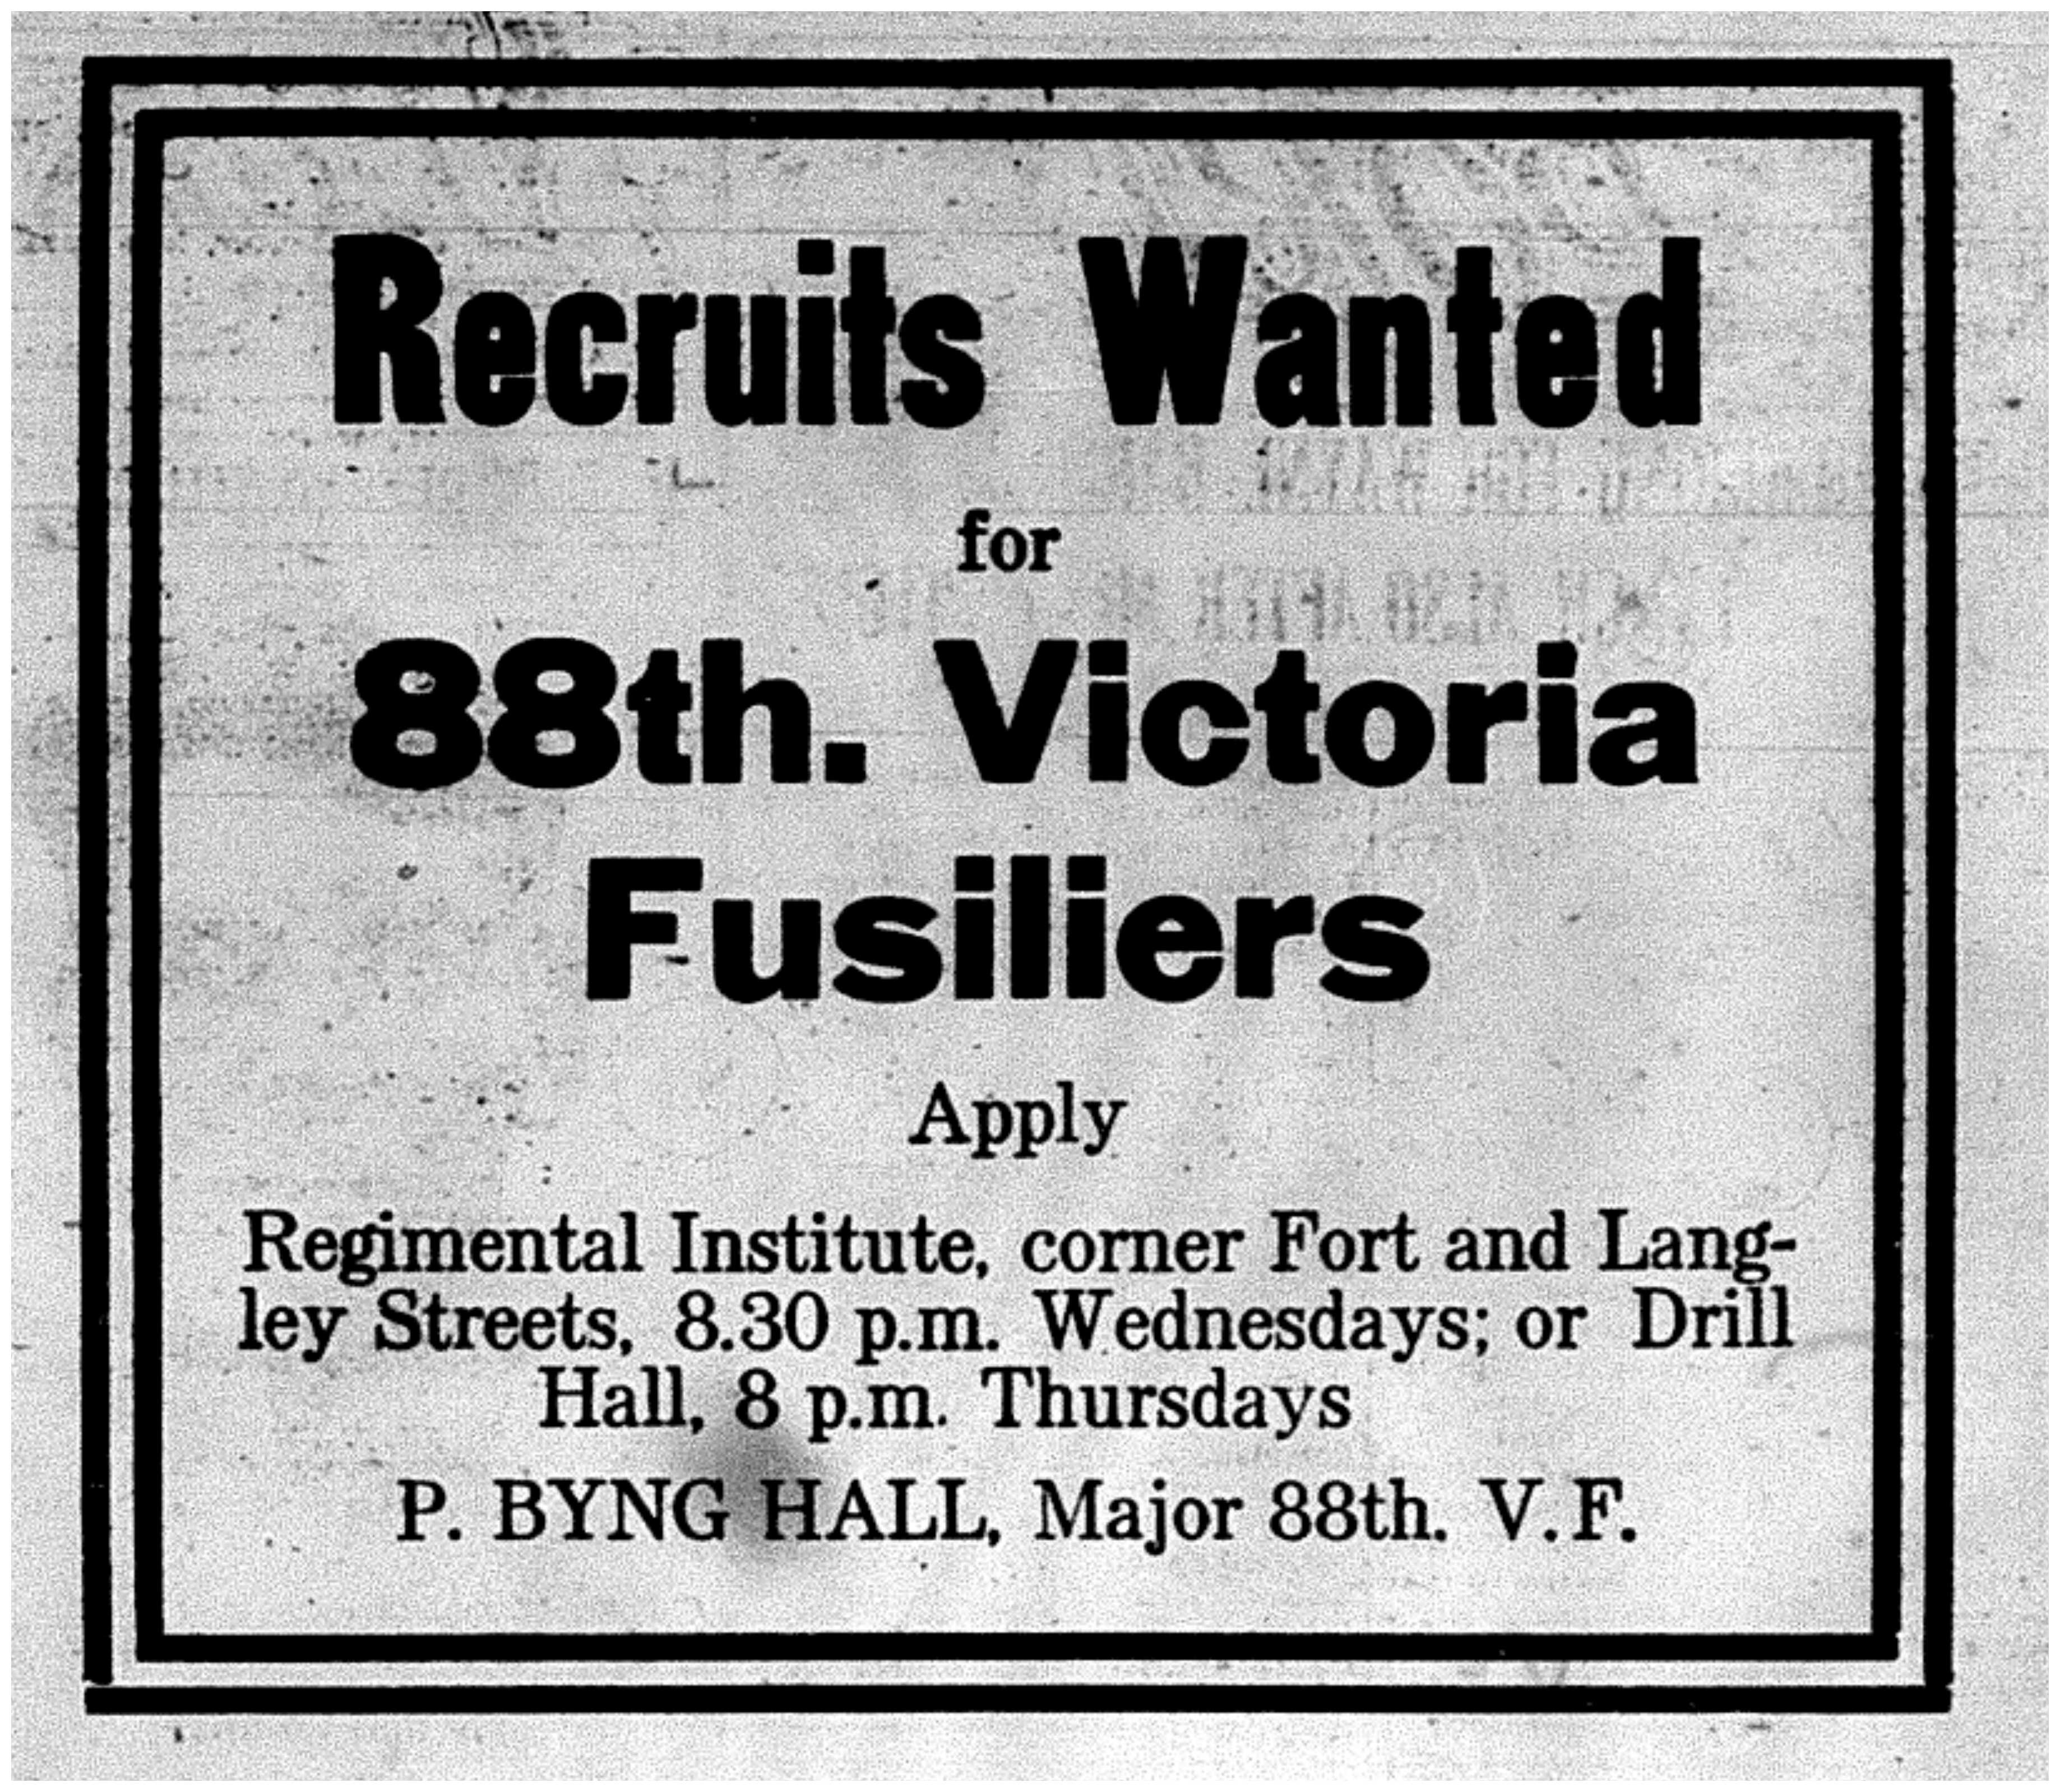 "Recruits Wanted"